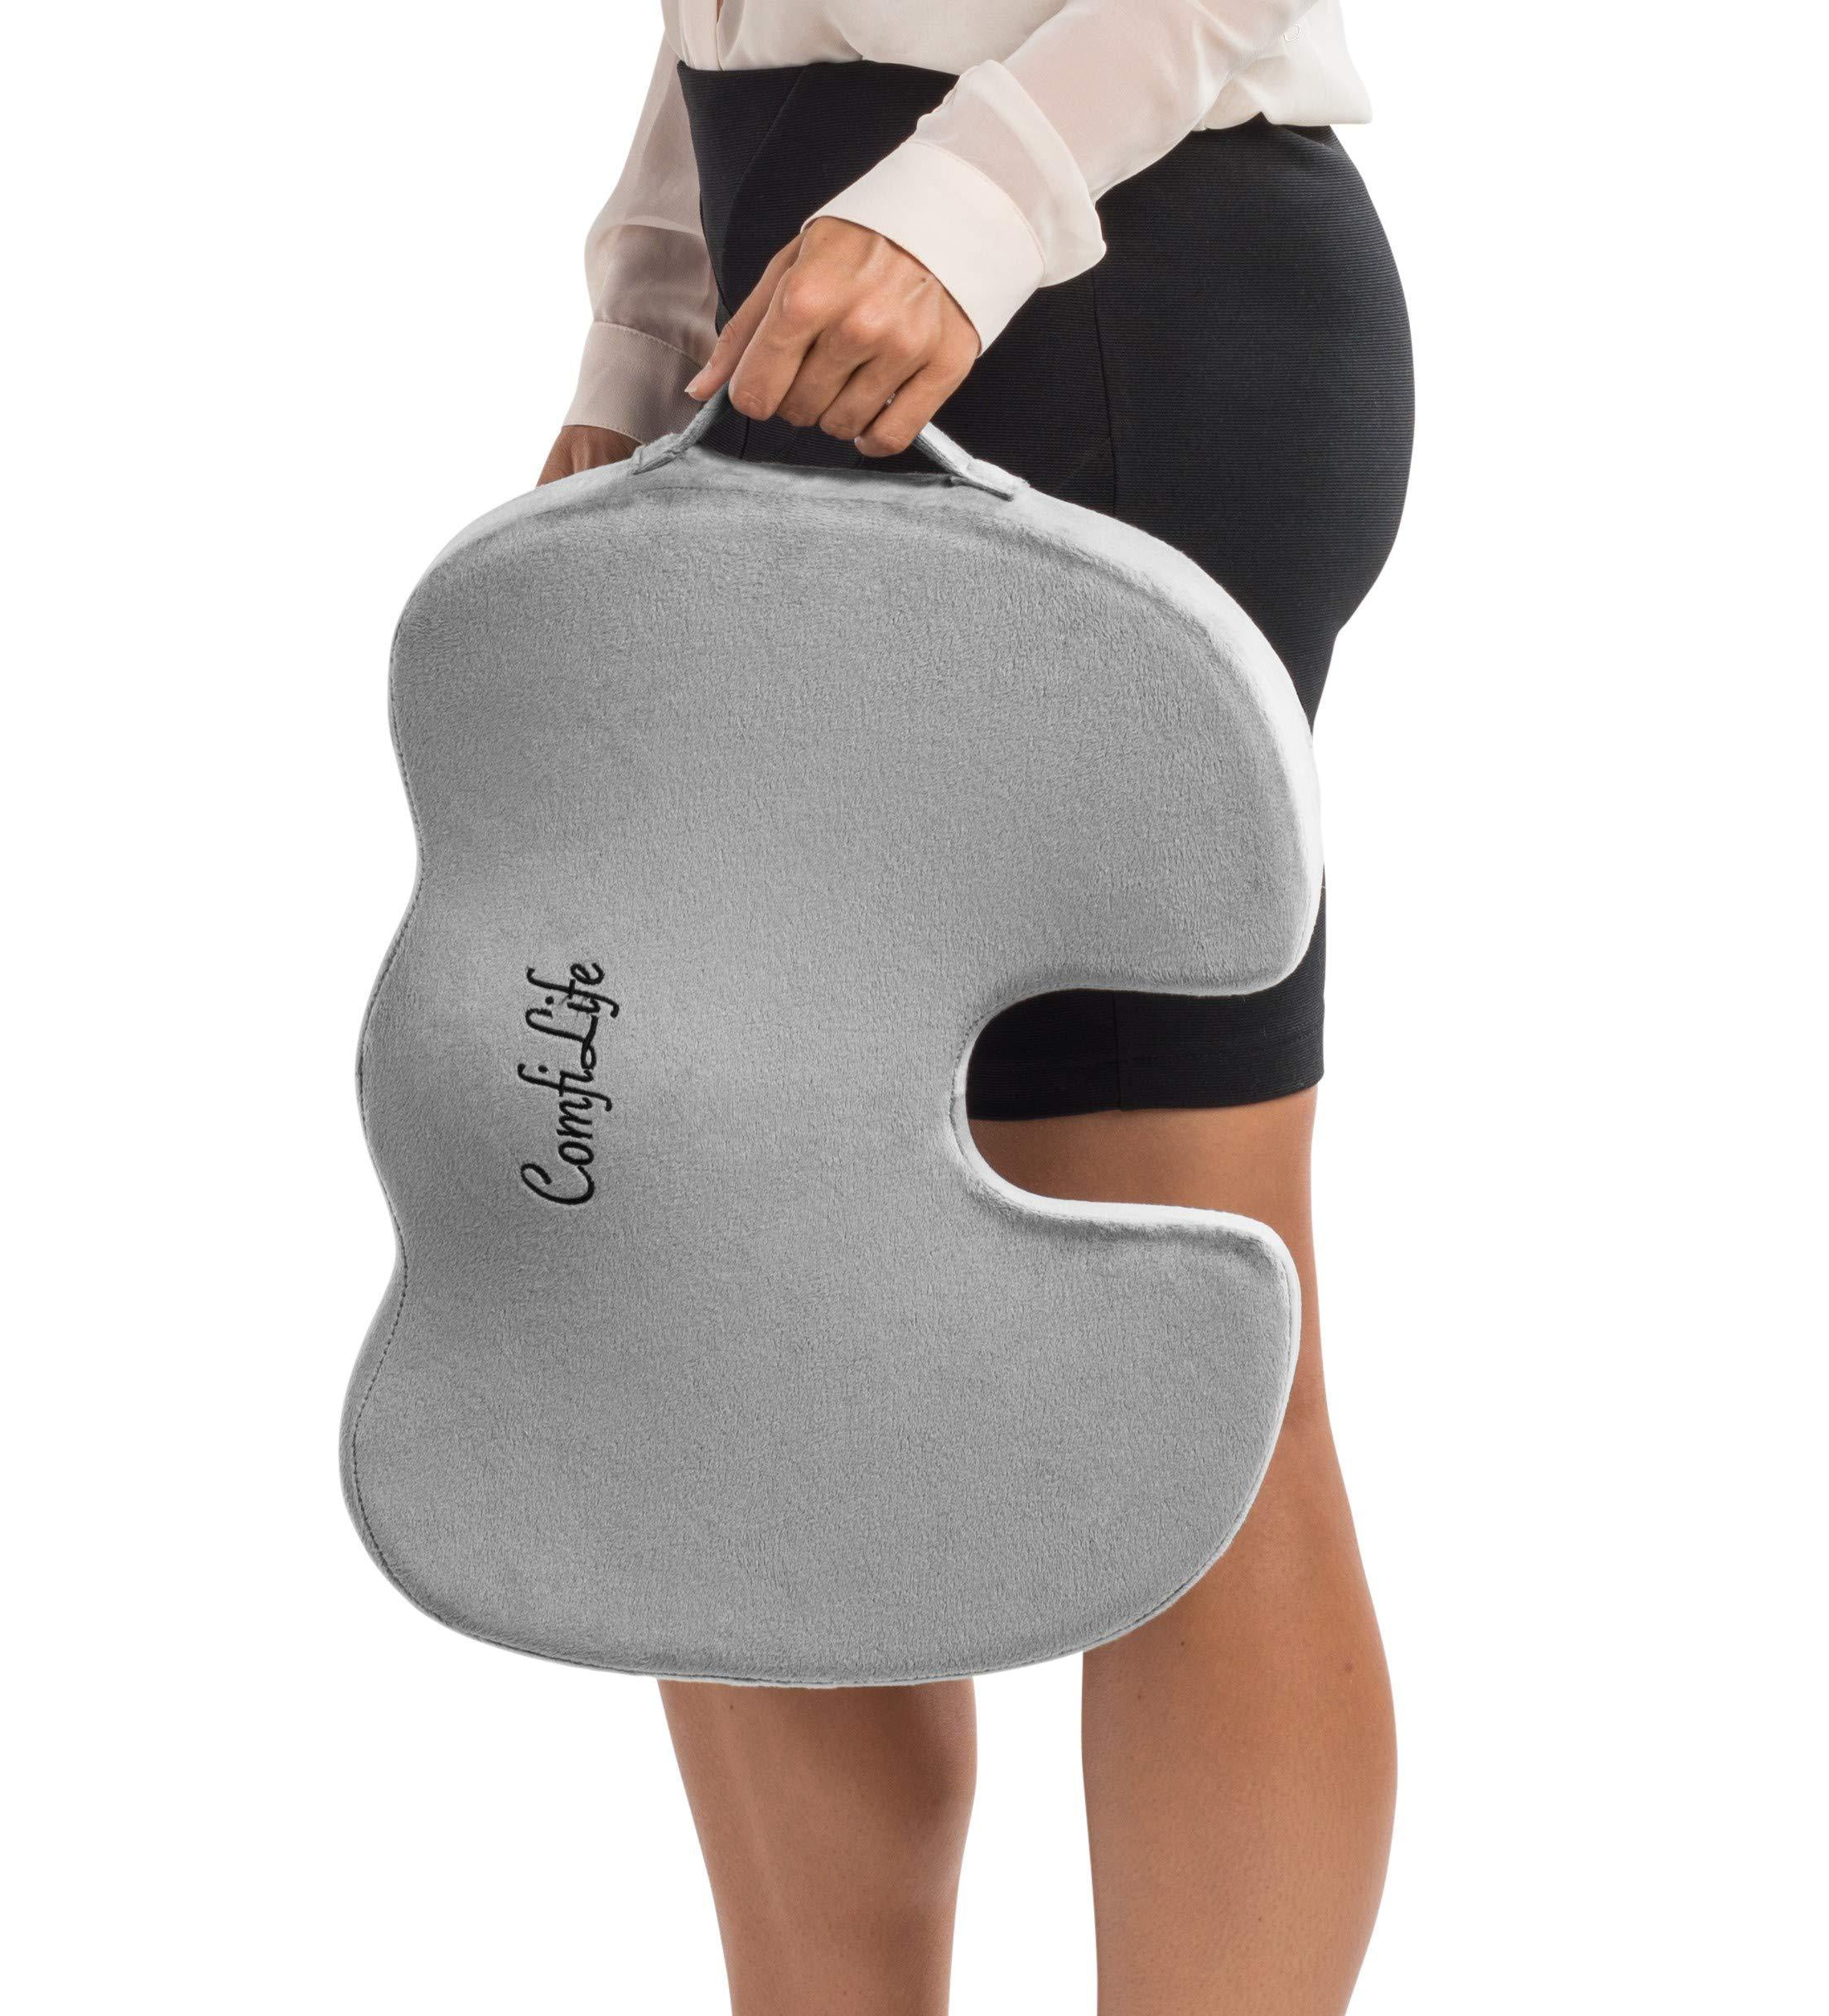 ComfiLife Coccyx Orthopedic Memory Foam Office Chair and Car Seat Cushion  for Back Pain and Sciatica Relief (Gray) 